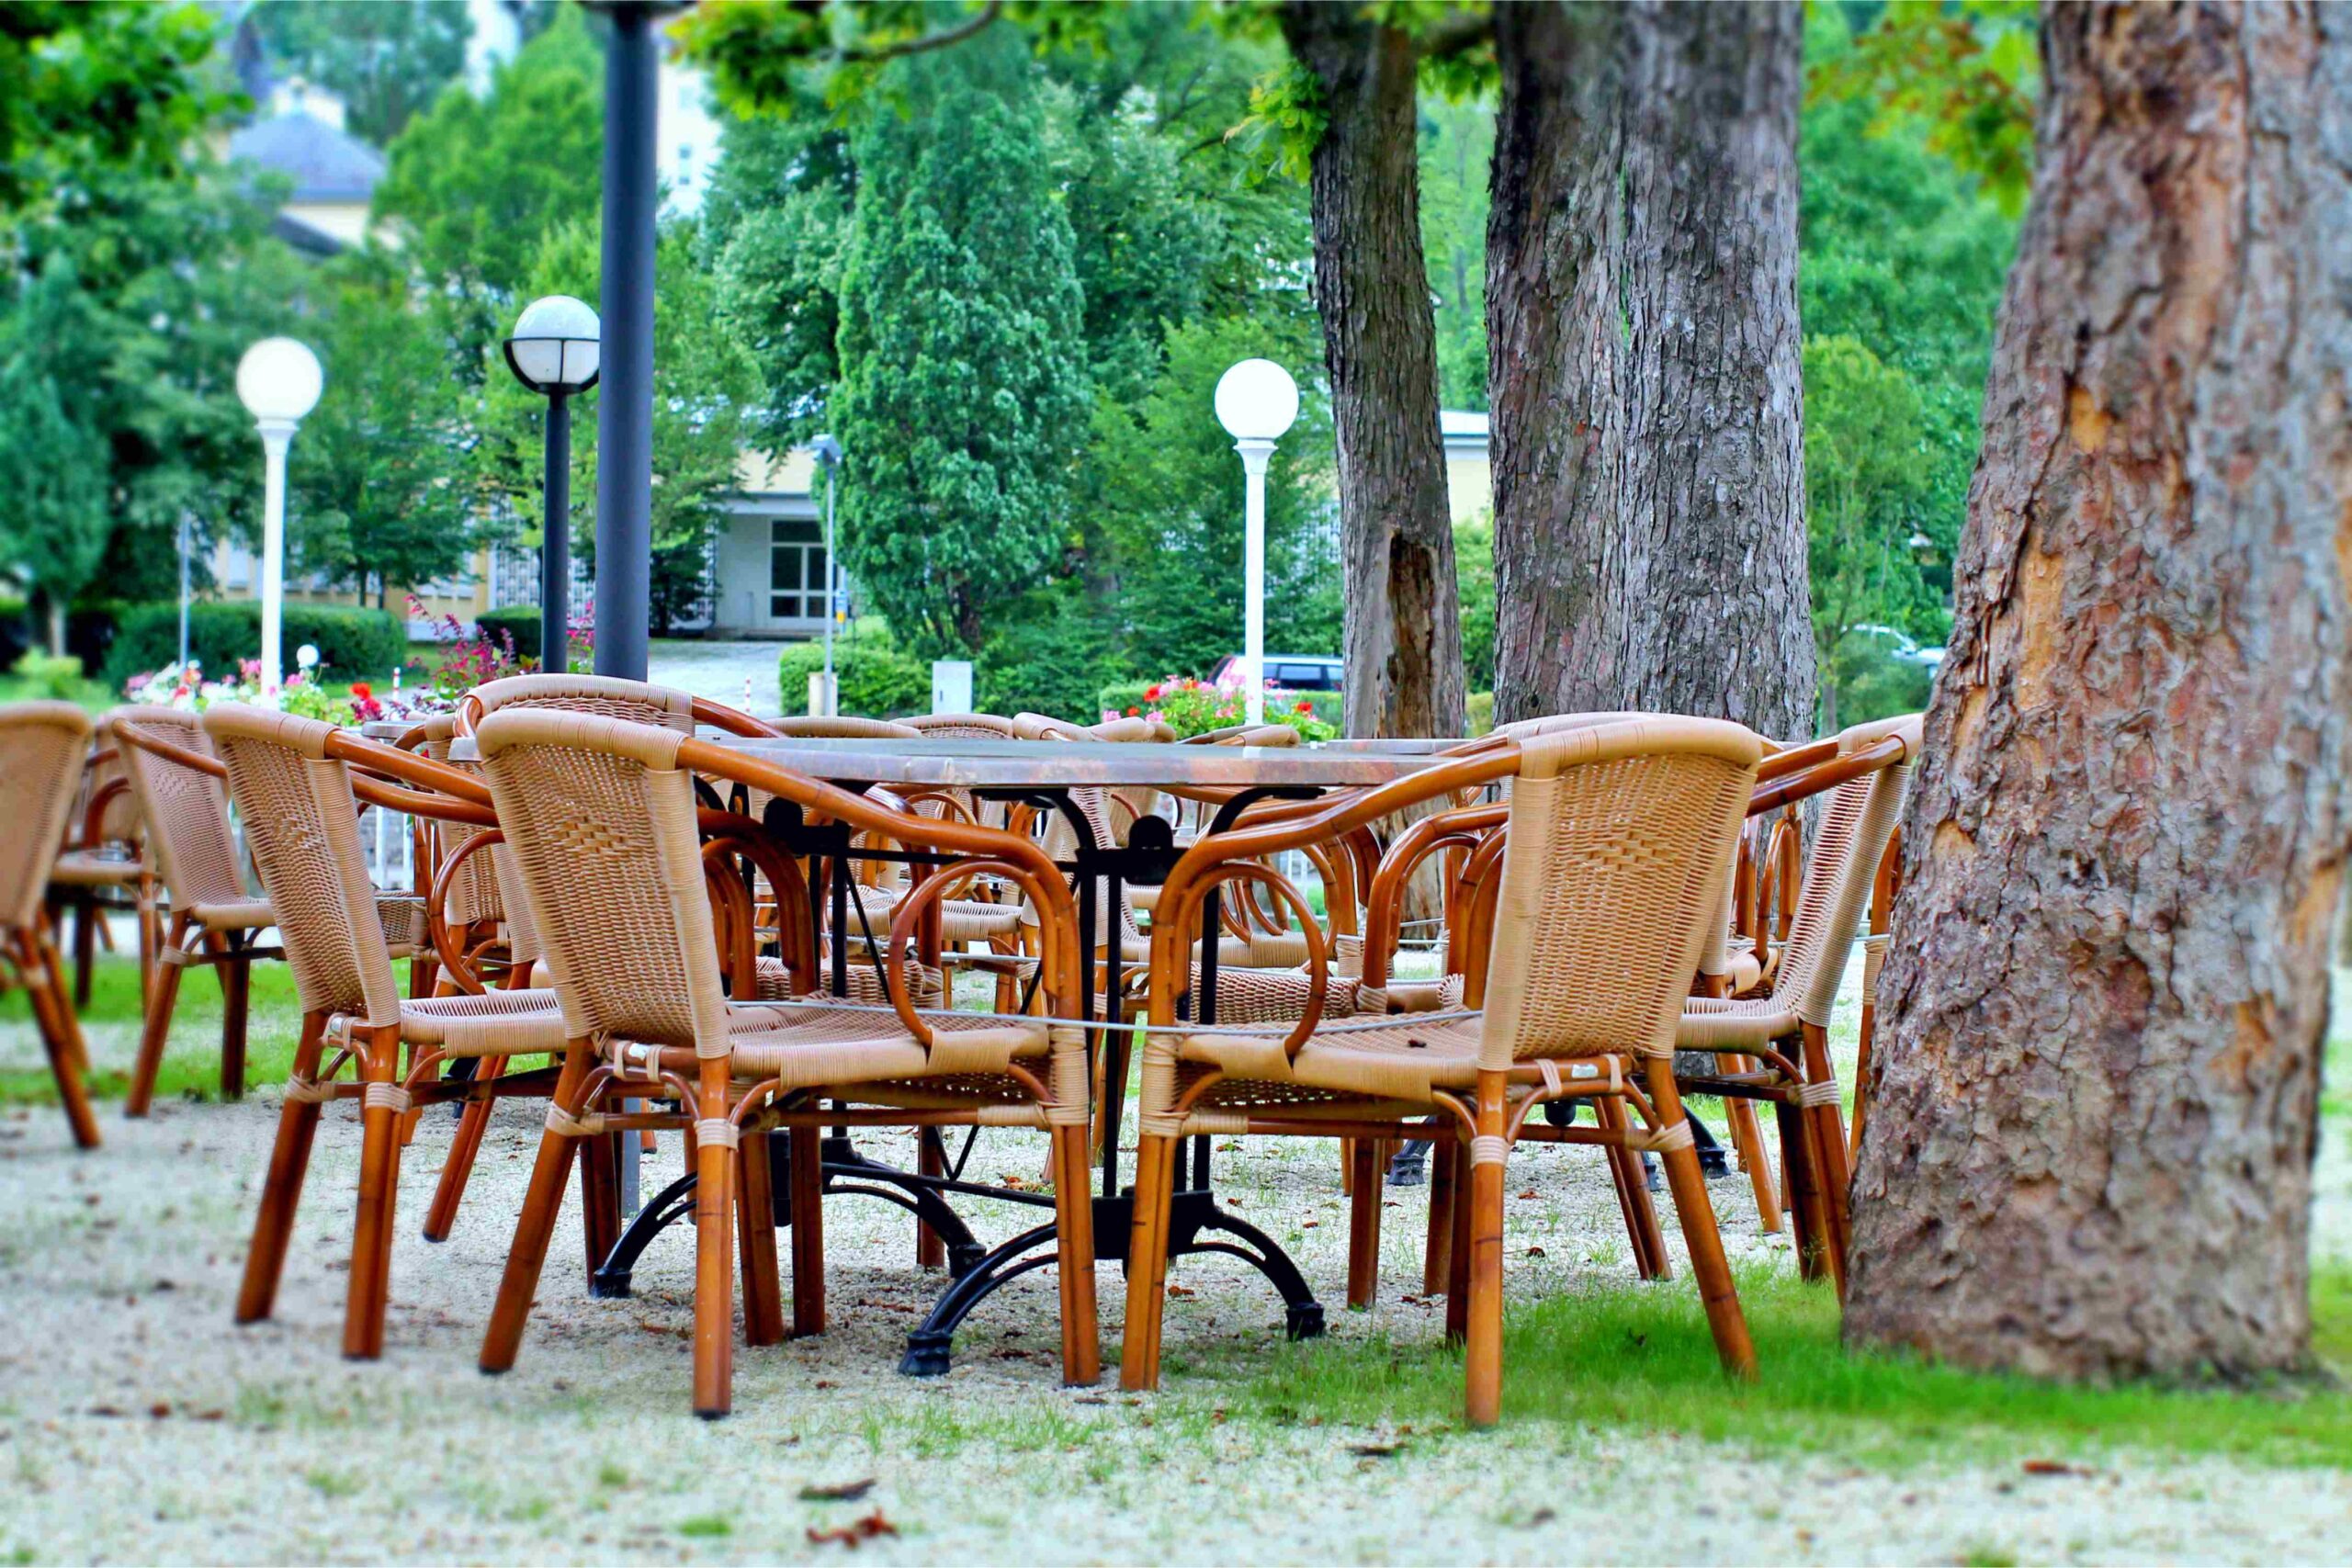 Cane cafe chairs